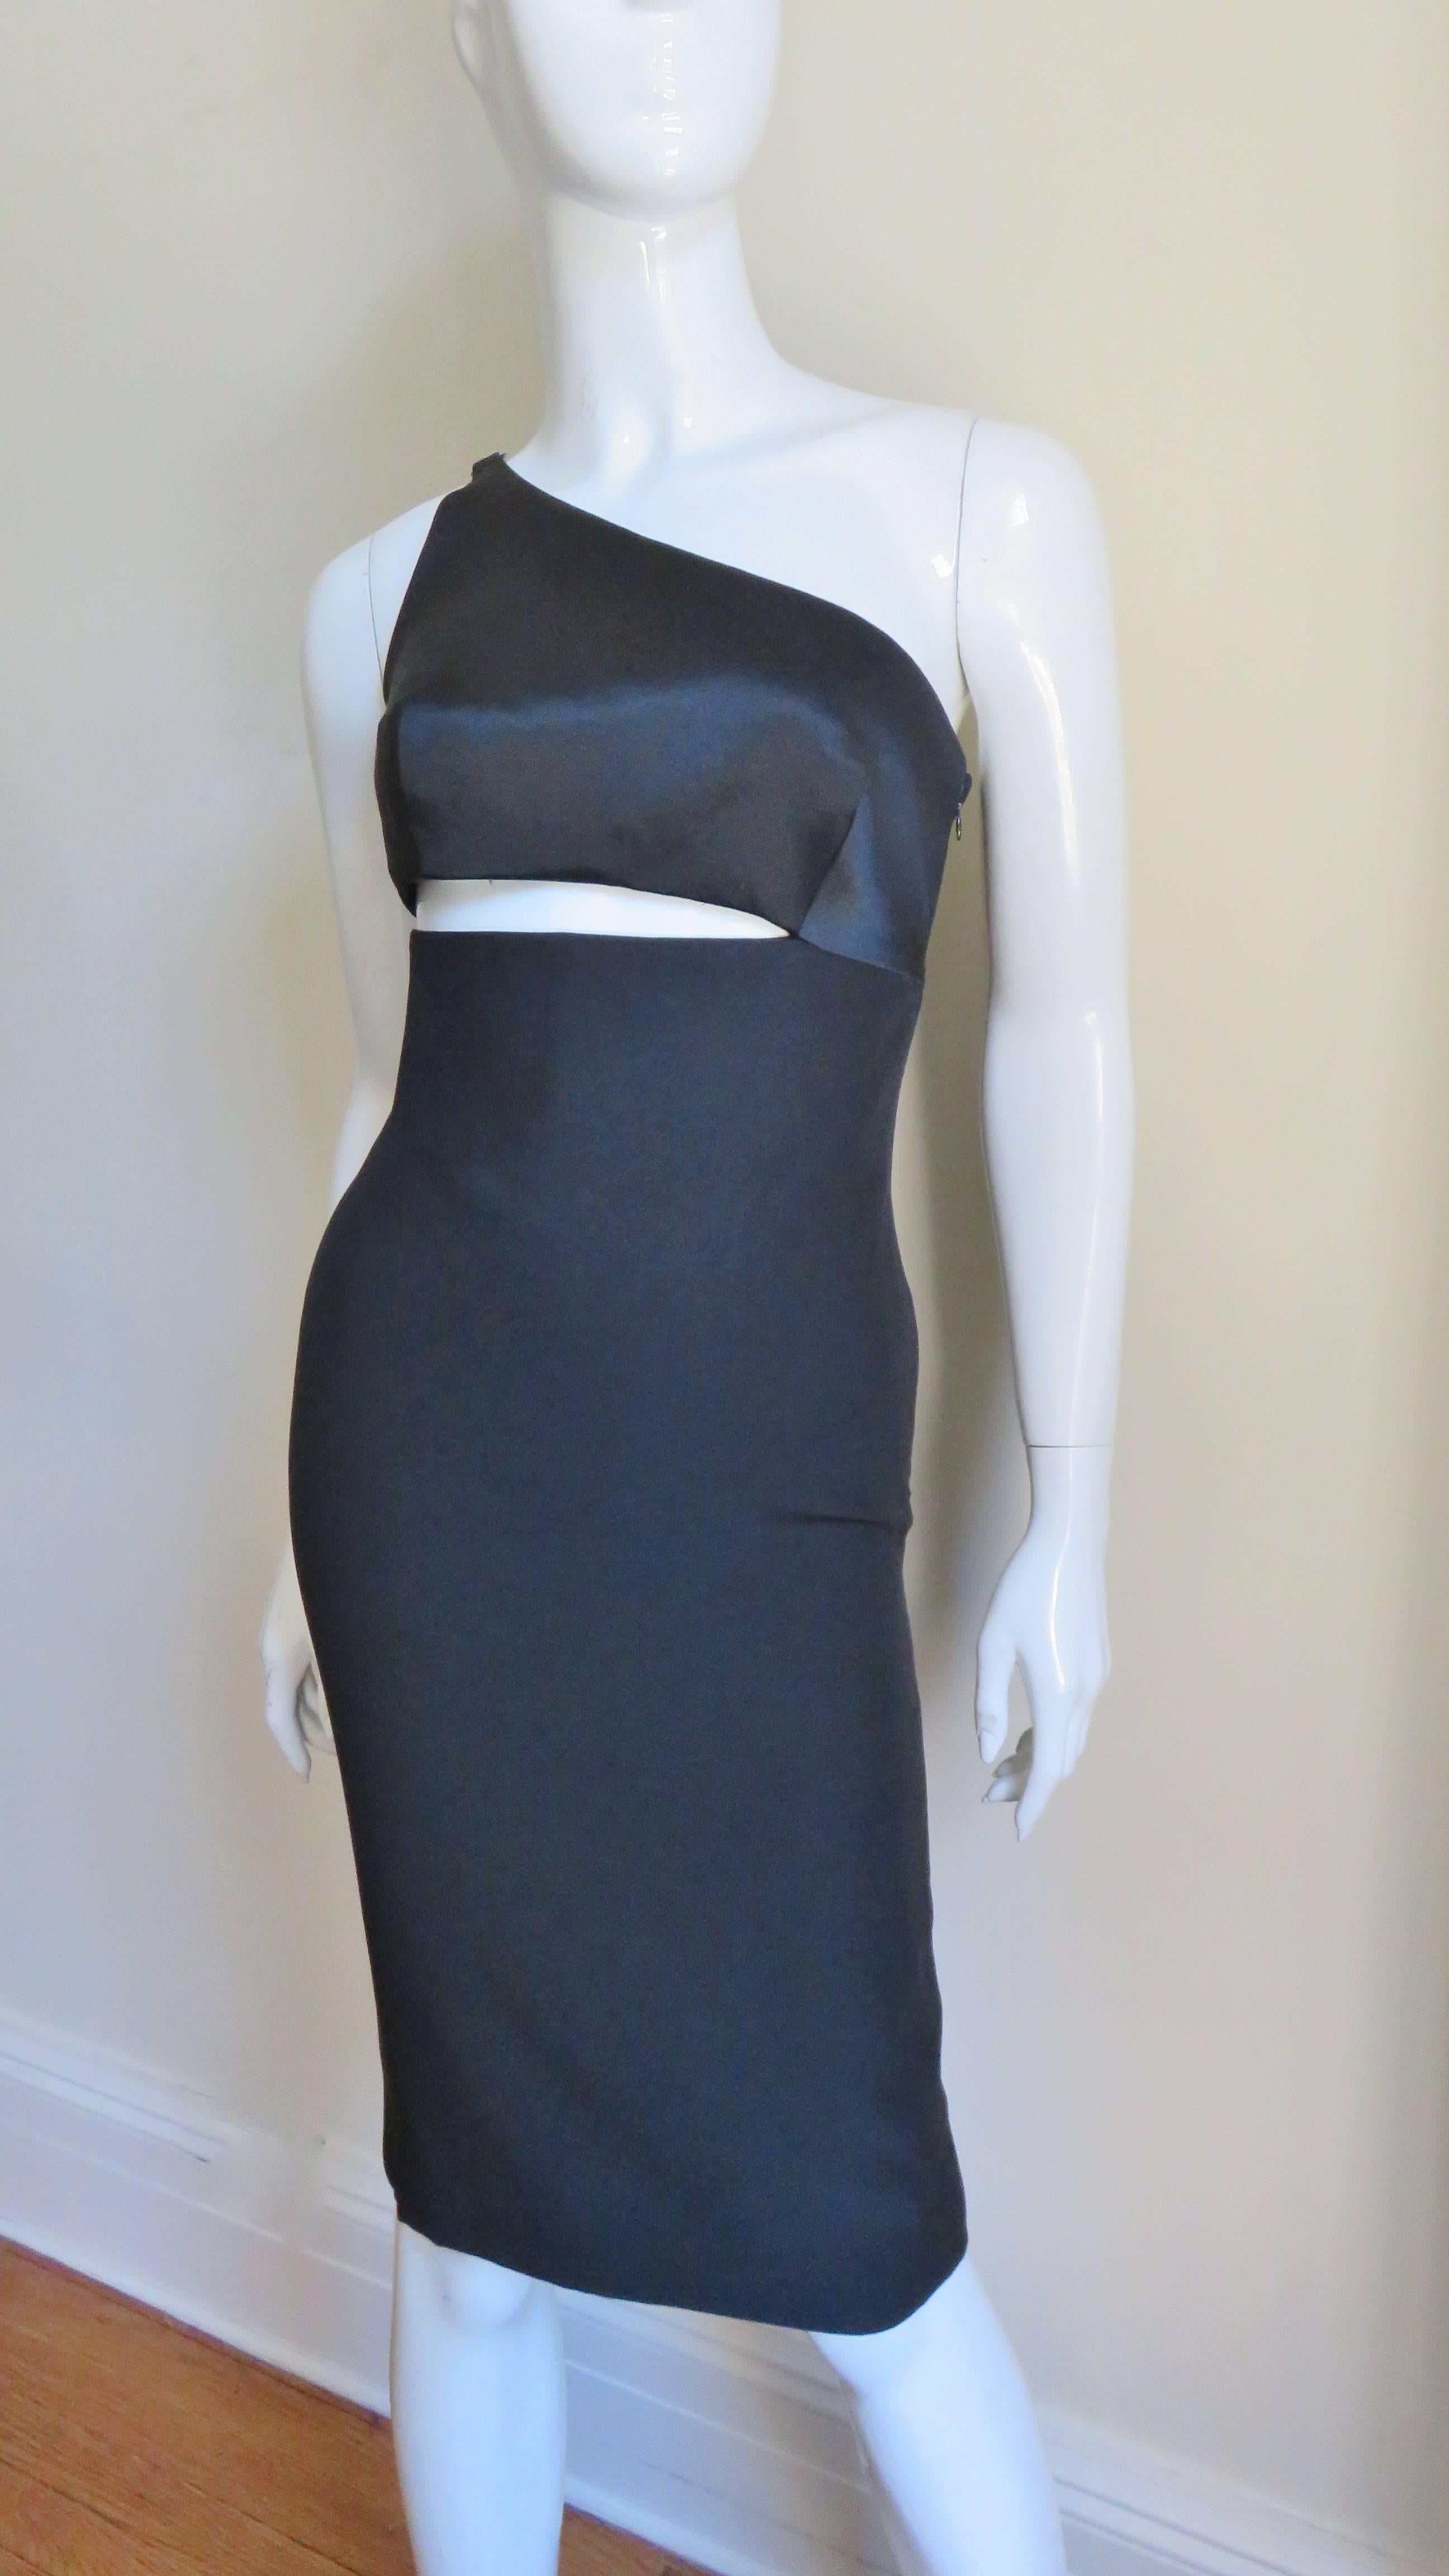 A fabulous black silk dress from Gianni Versace.  It is comprised of a one shoulder bodice attached by one side to the skirt portion leaving a wedge of exposed skin between the two.  It is fully lined in silk, closes with a side zipper and has a